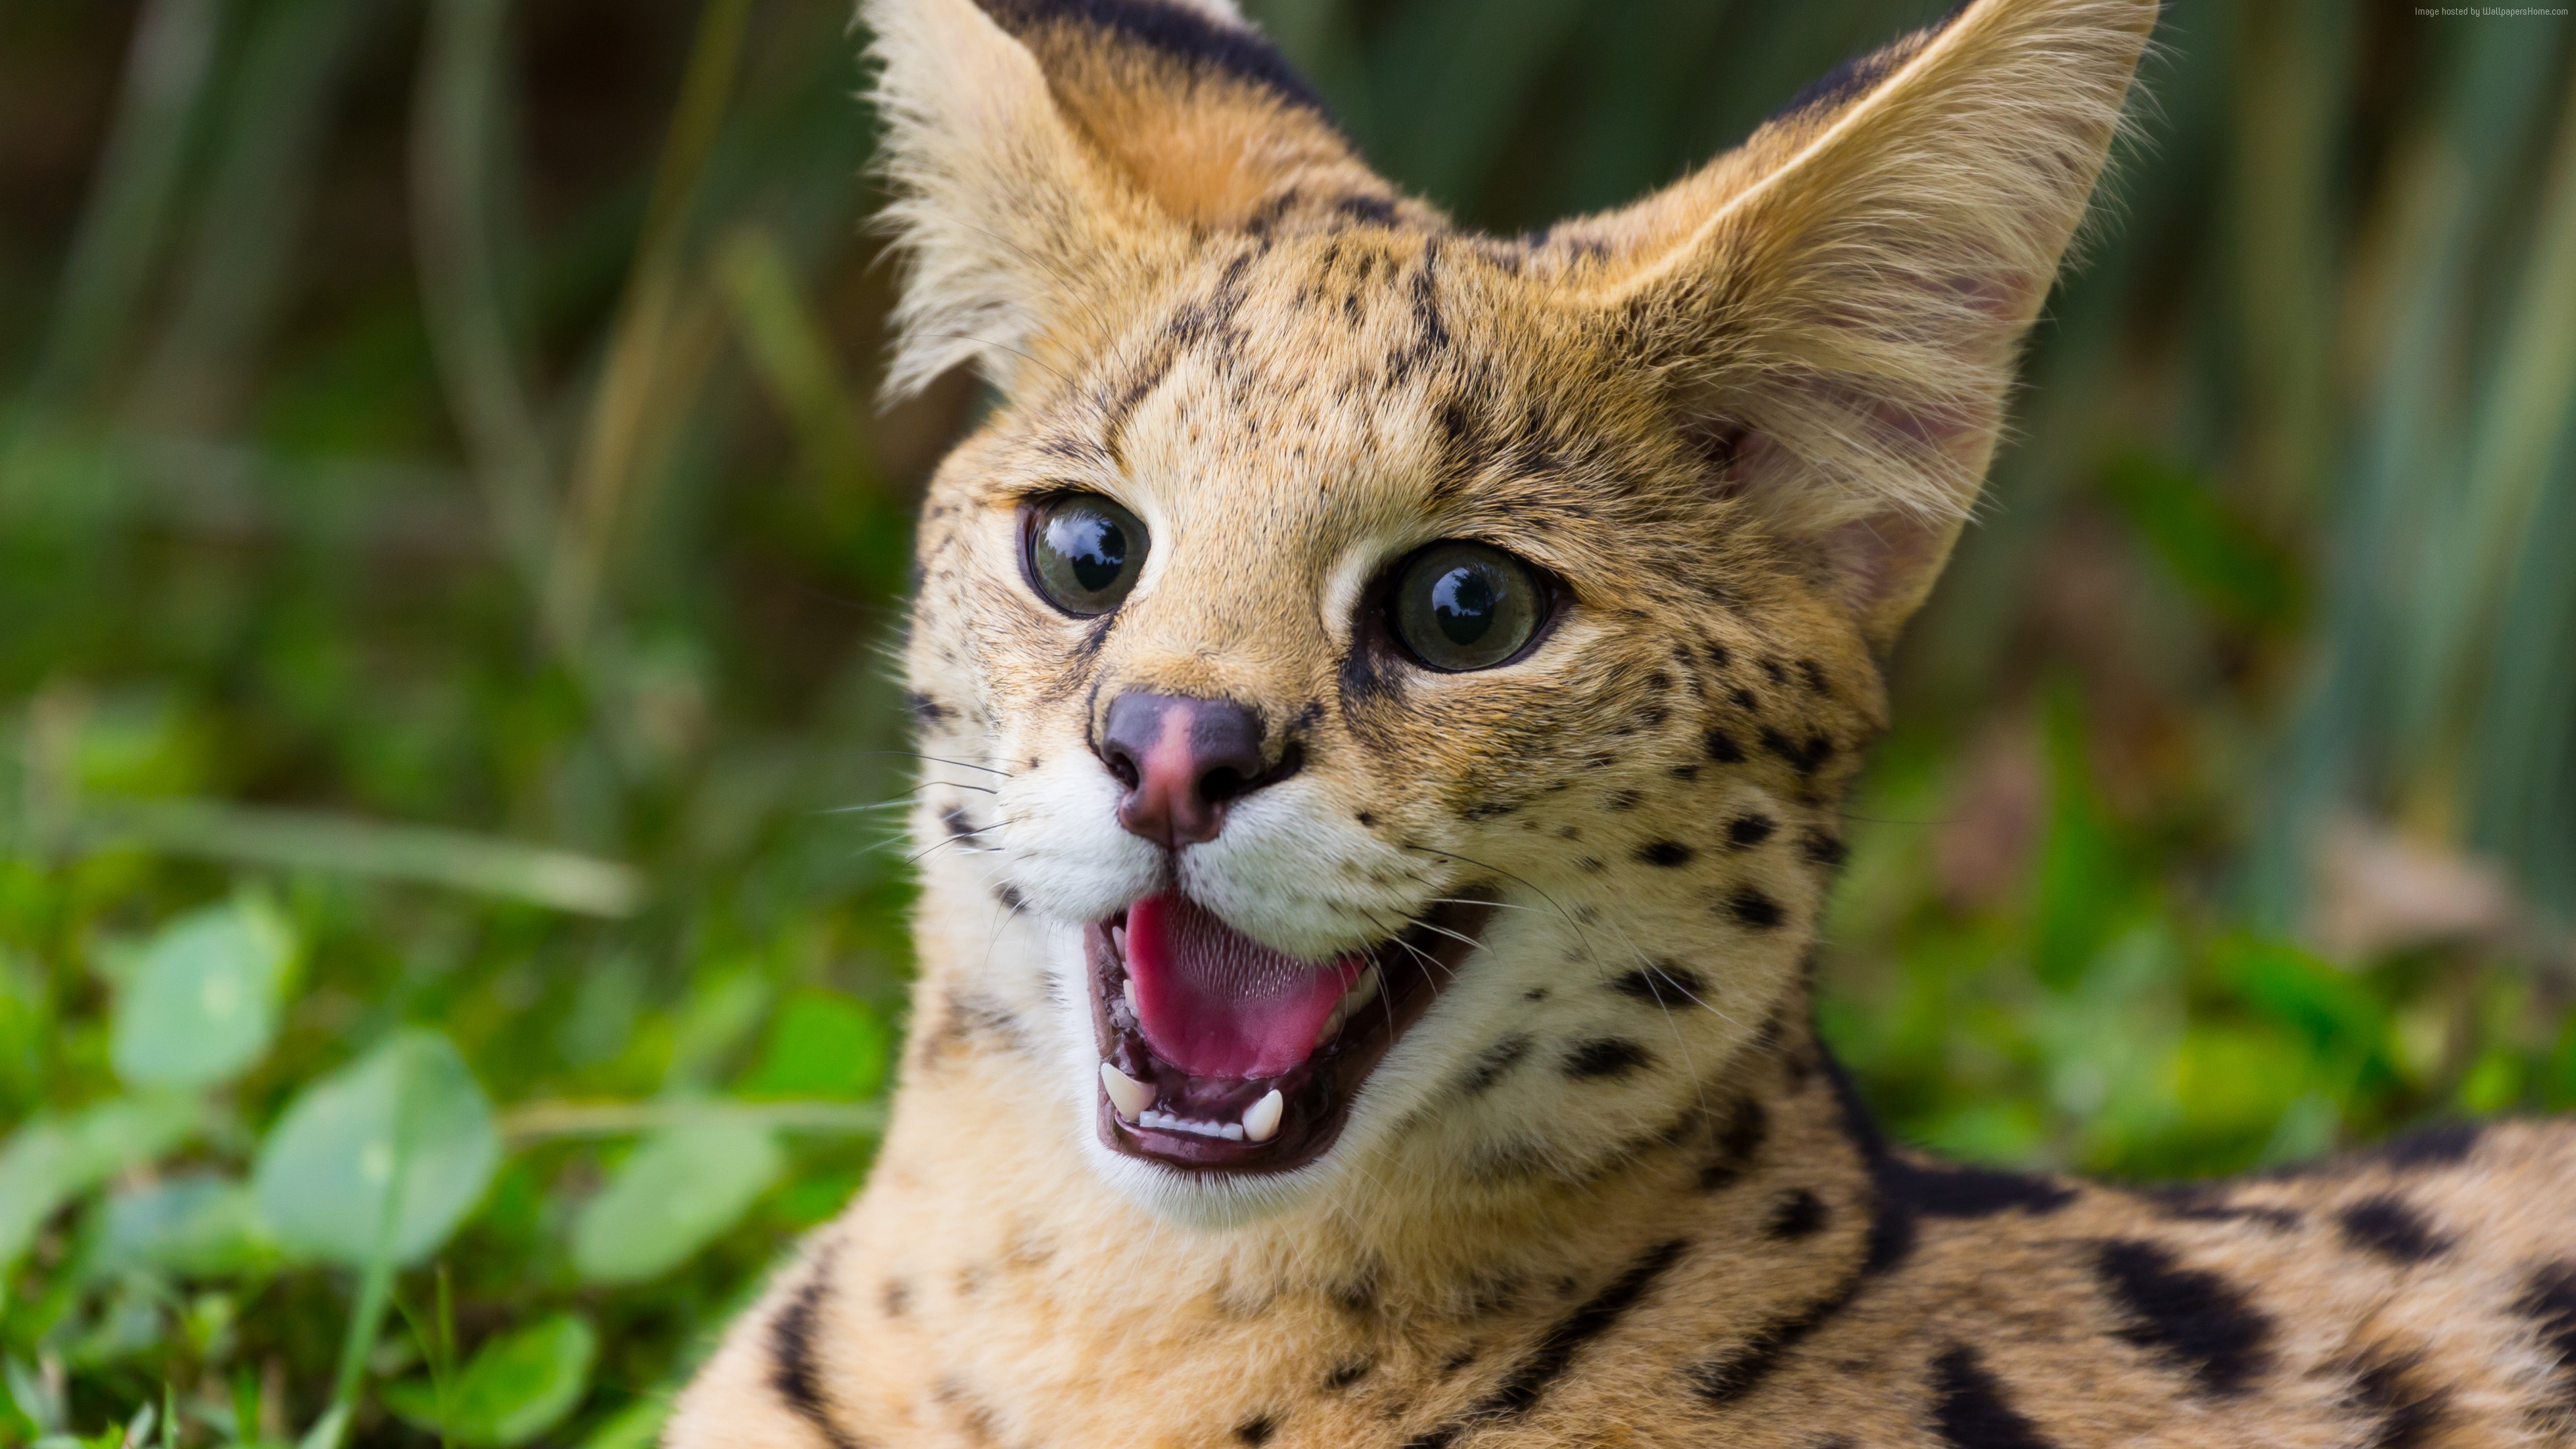 General 3840x2160 animals serval mammals closeup big cats depth of field pointy teeth whiskers fur nature leaves open mouth